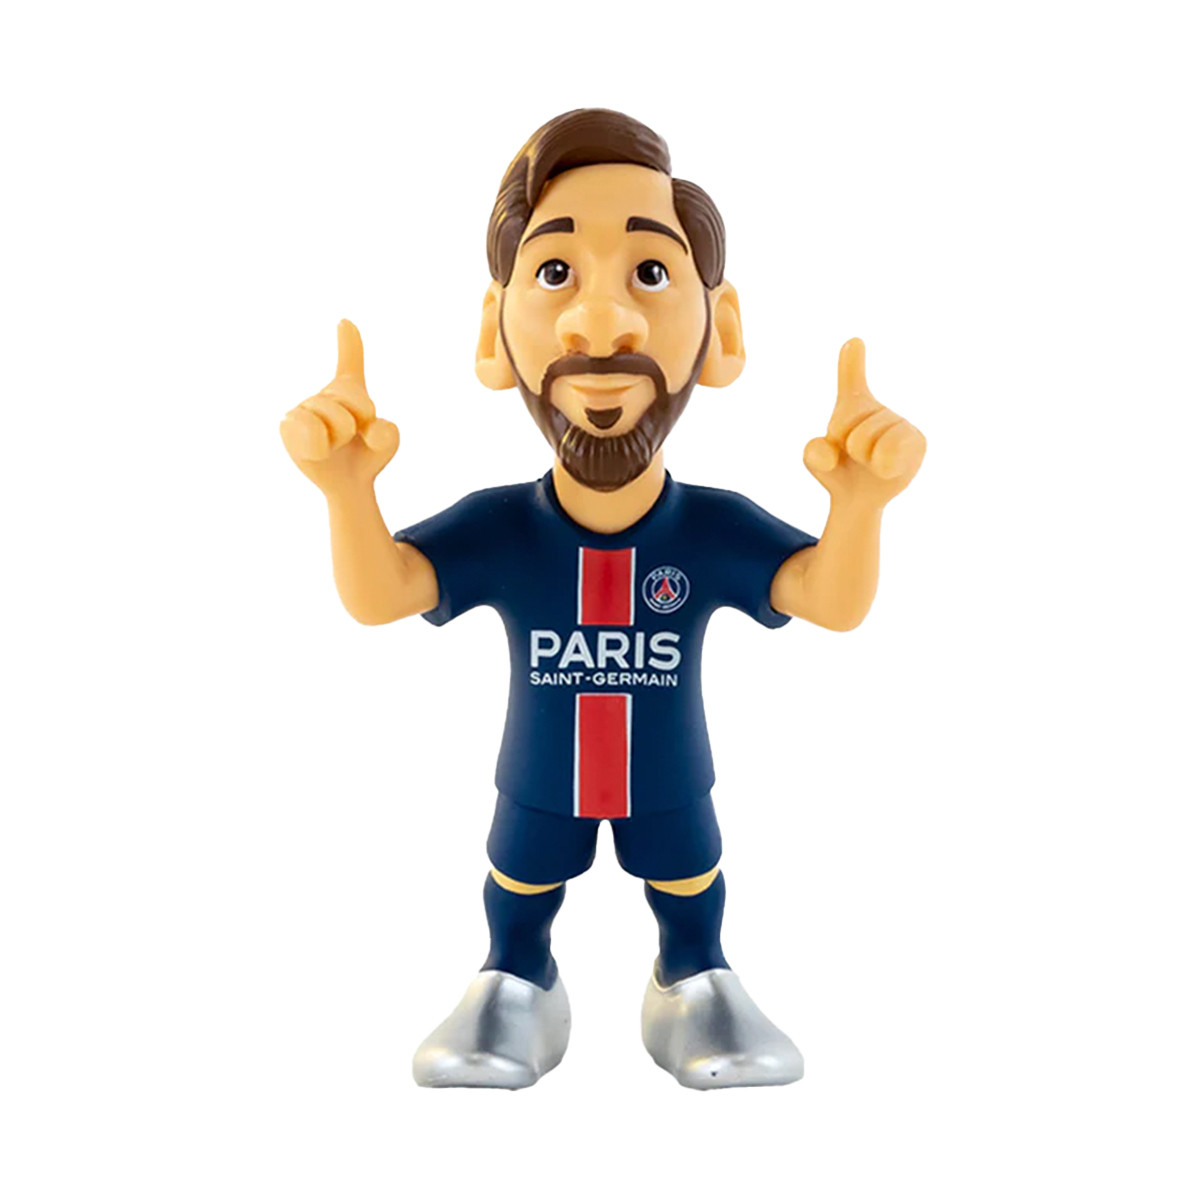 Minix Collectible Figurines International Giant Club Football Star Series  Messi Maradona Mbappe Collection Model Action Figures